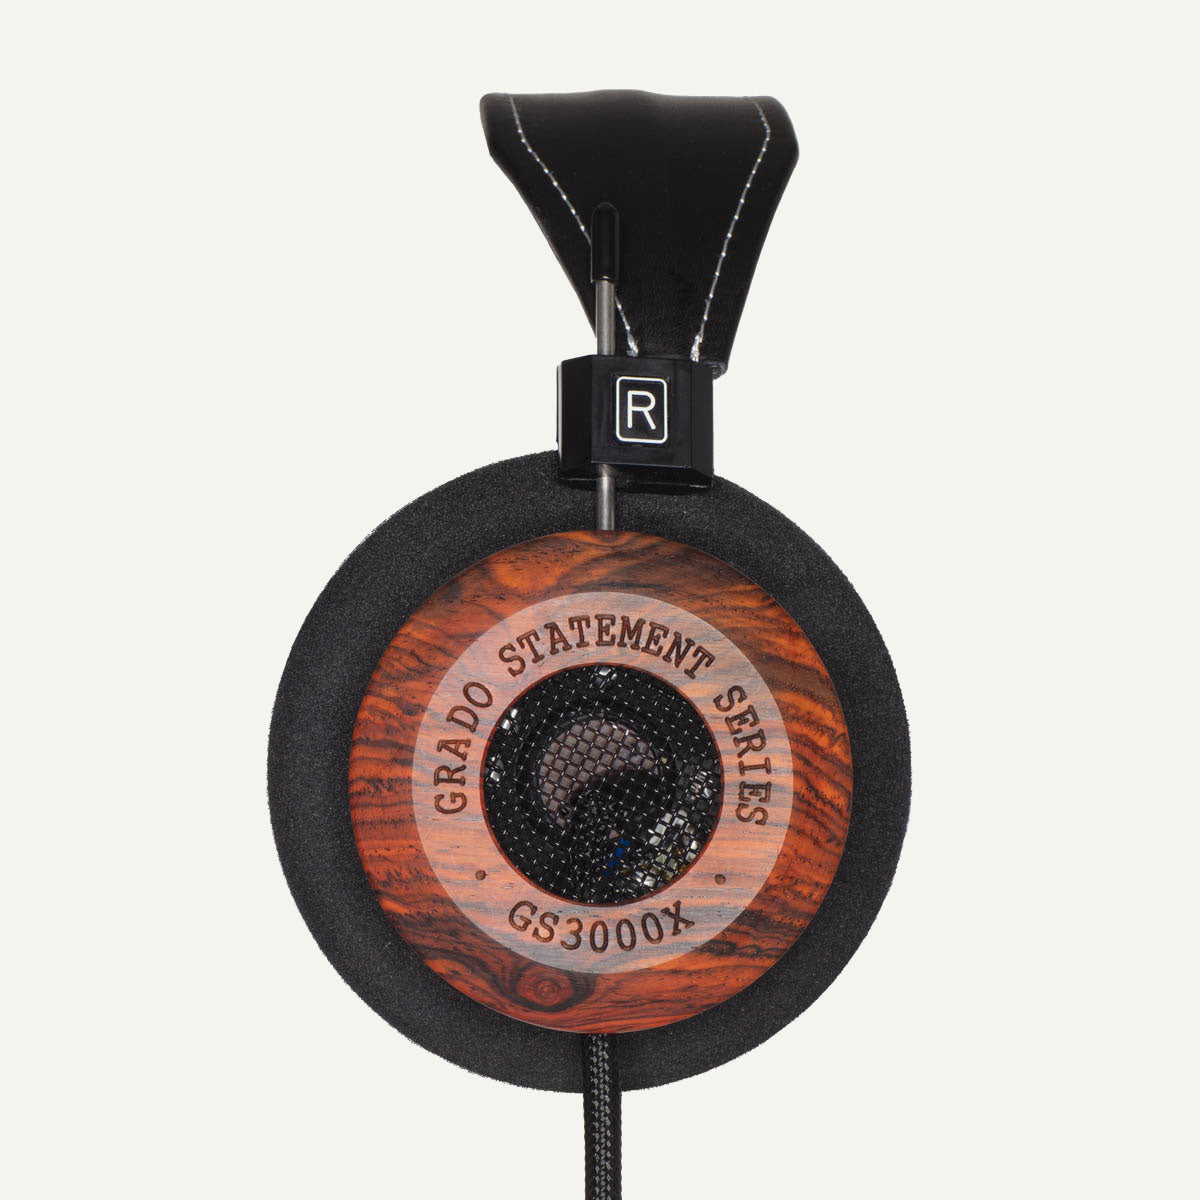 Get the price on all Grado Headphones and Grado Cartridges: Grado SR325x - Grado SR60x - Grado GW100x - Grado GS3000x - Grado SR80x -Grado  GS1000x - Grado Prestige Series - Grado Lineage Series - Grado Timbre Series - Grado Black3 / Green3 - Grado Prestige Series - Grado Timbre Series - Grado Lineage Series - Grado Specialty Series... 